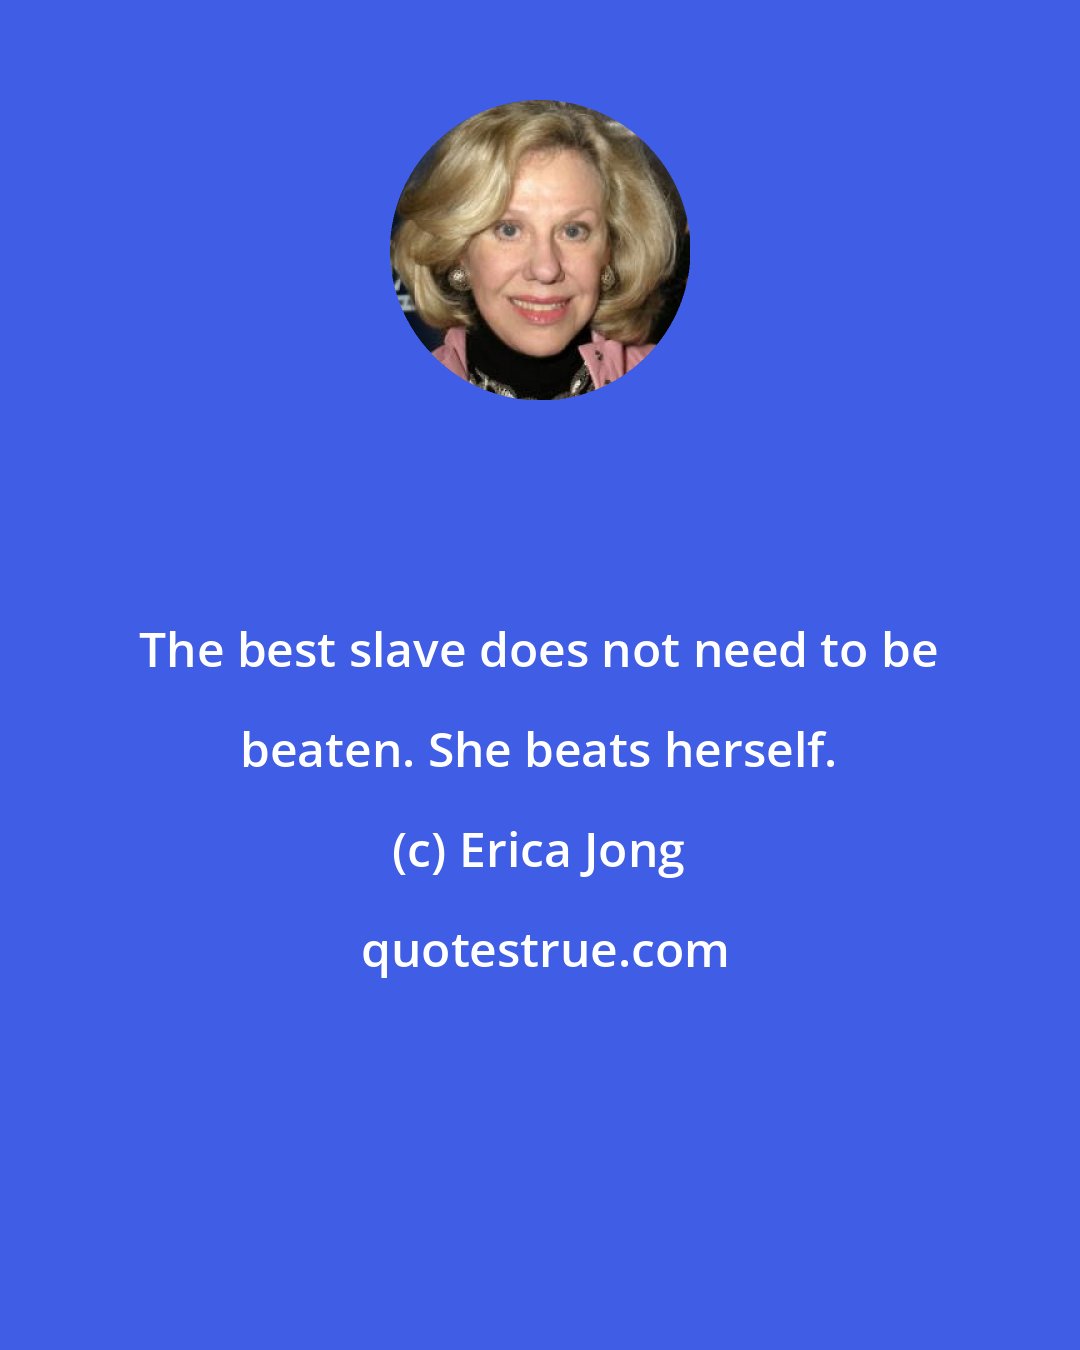 Erica Jong: The best slave does not need to be beaten. She beats herself.